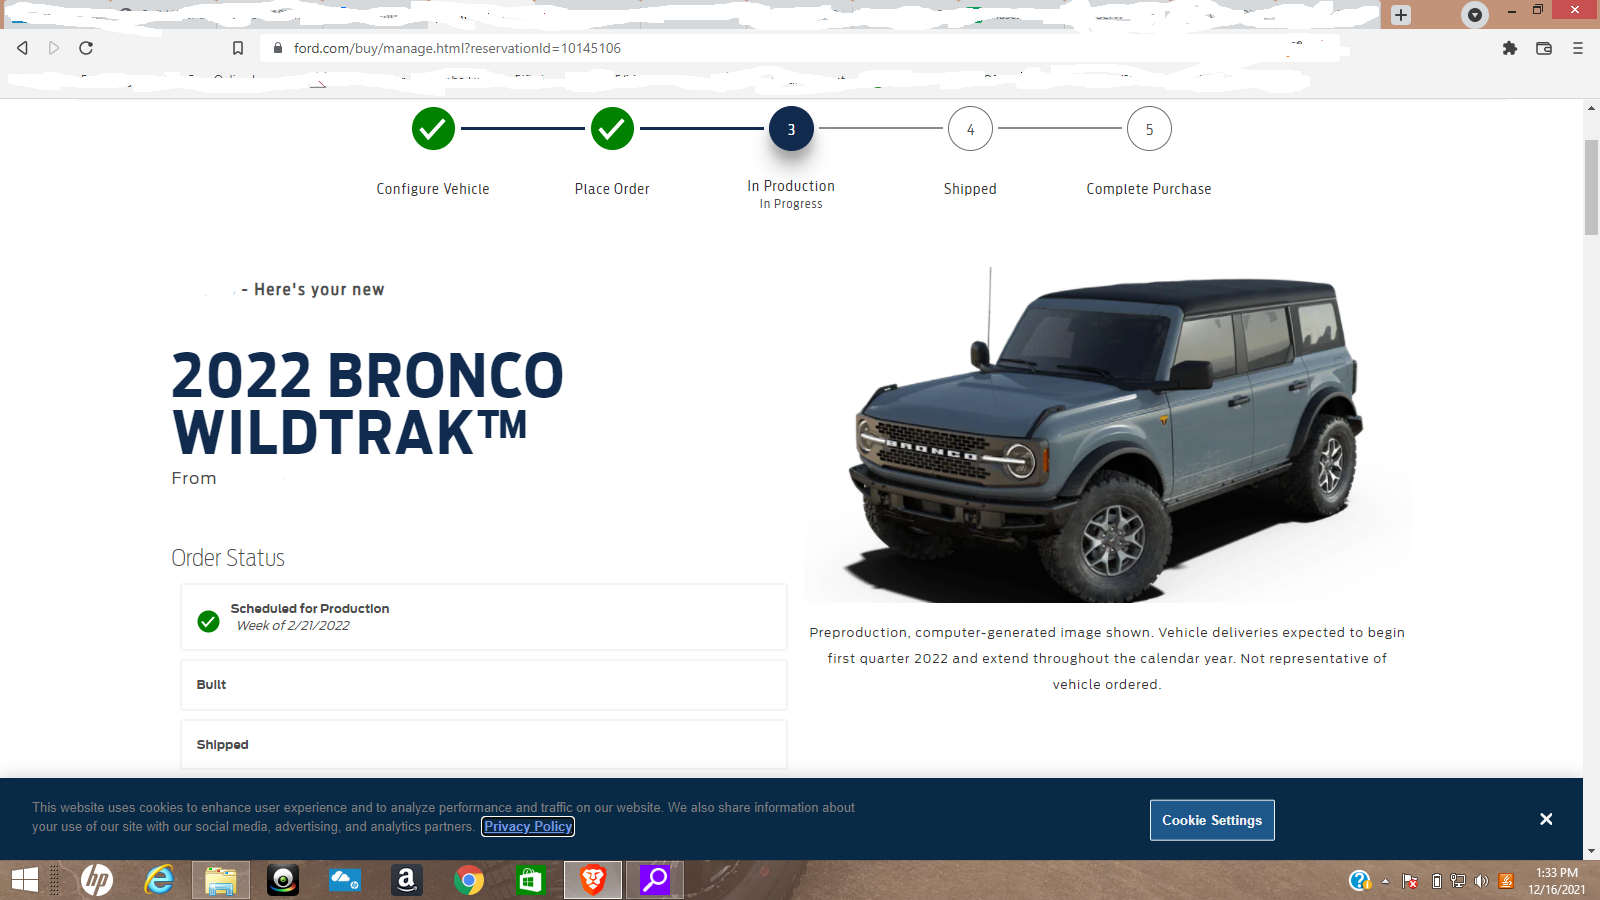 Ford Bronco [SCHEDULING NOW 12/16] ⏱ 2022 Bronco Scheduling Next Week (12/13) For Build Weeks 2/14 and 2/21 Screenshot (5)